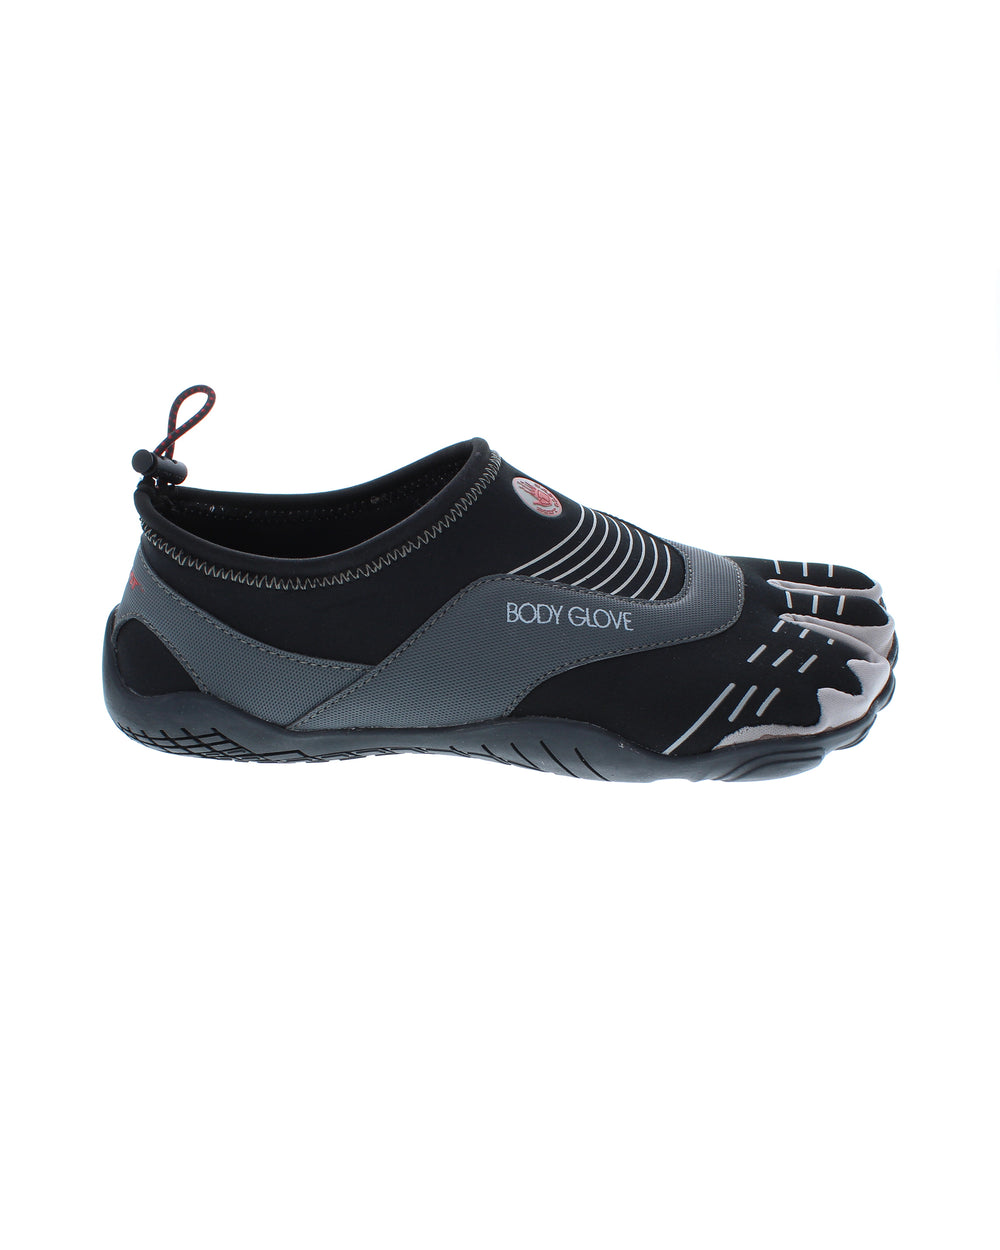 Men's 3T Barefoot Cinch Water Shoes - Black/Rio Red